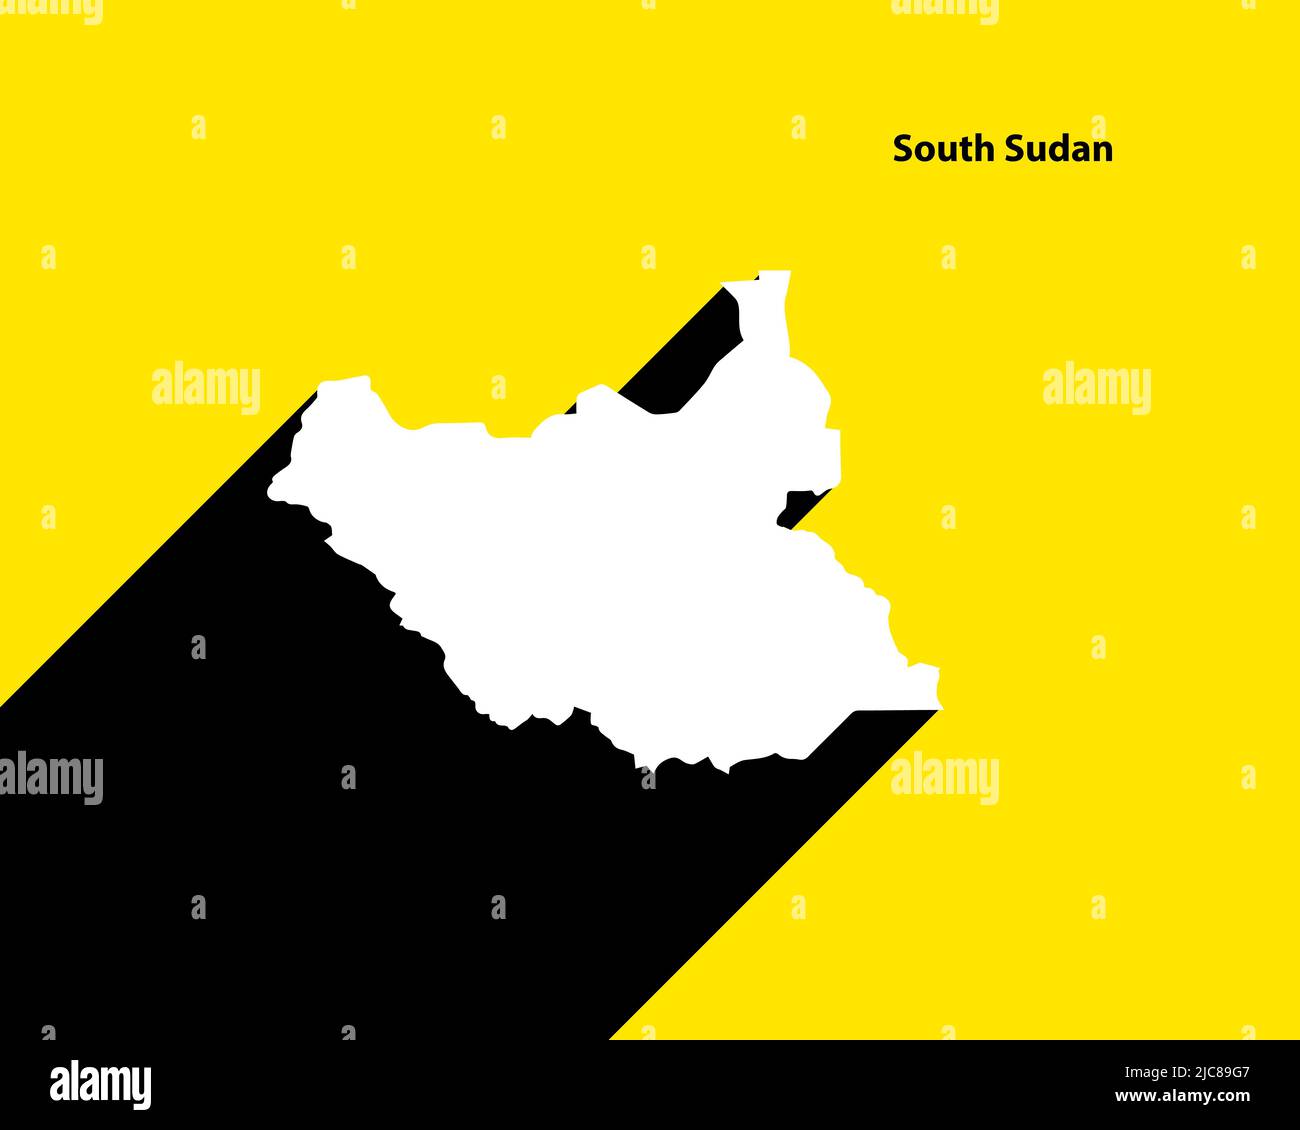 South Sudan Map on retro poster with long shadow. Vintage sign easy to edit, manipulate, resize or colorize. Stock Vector